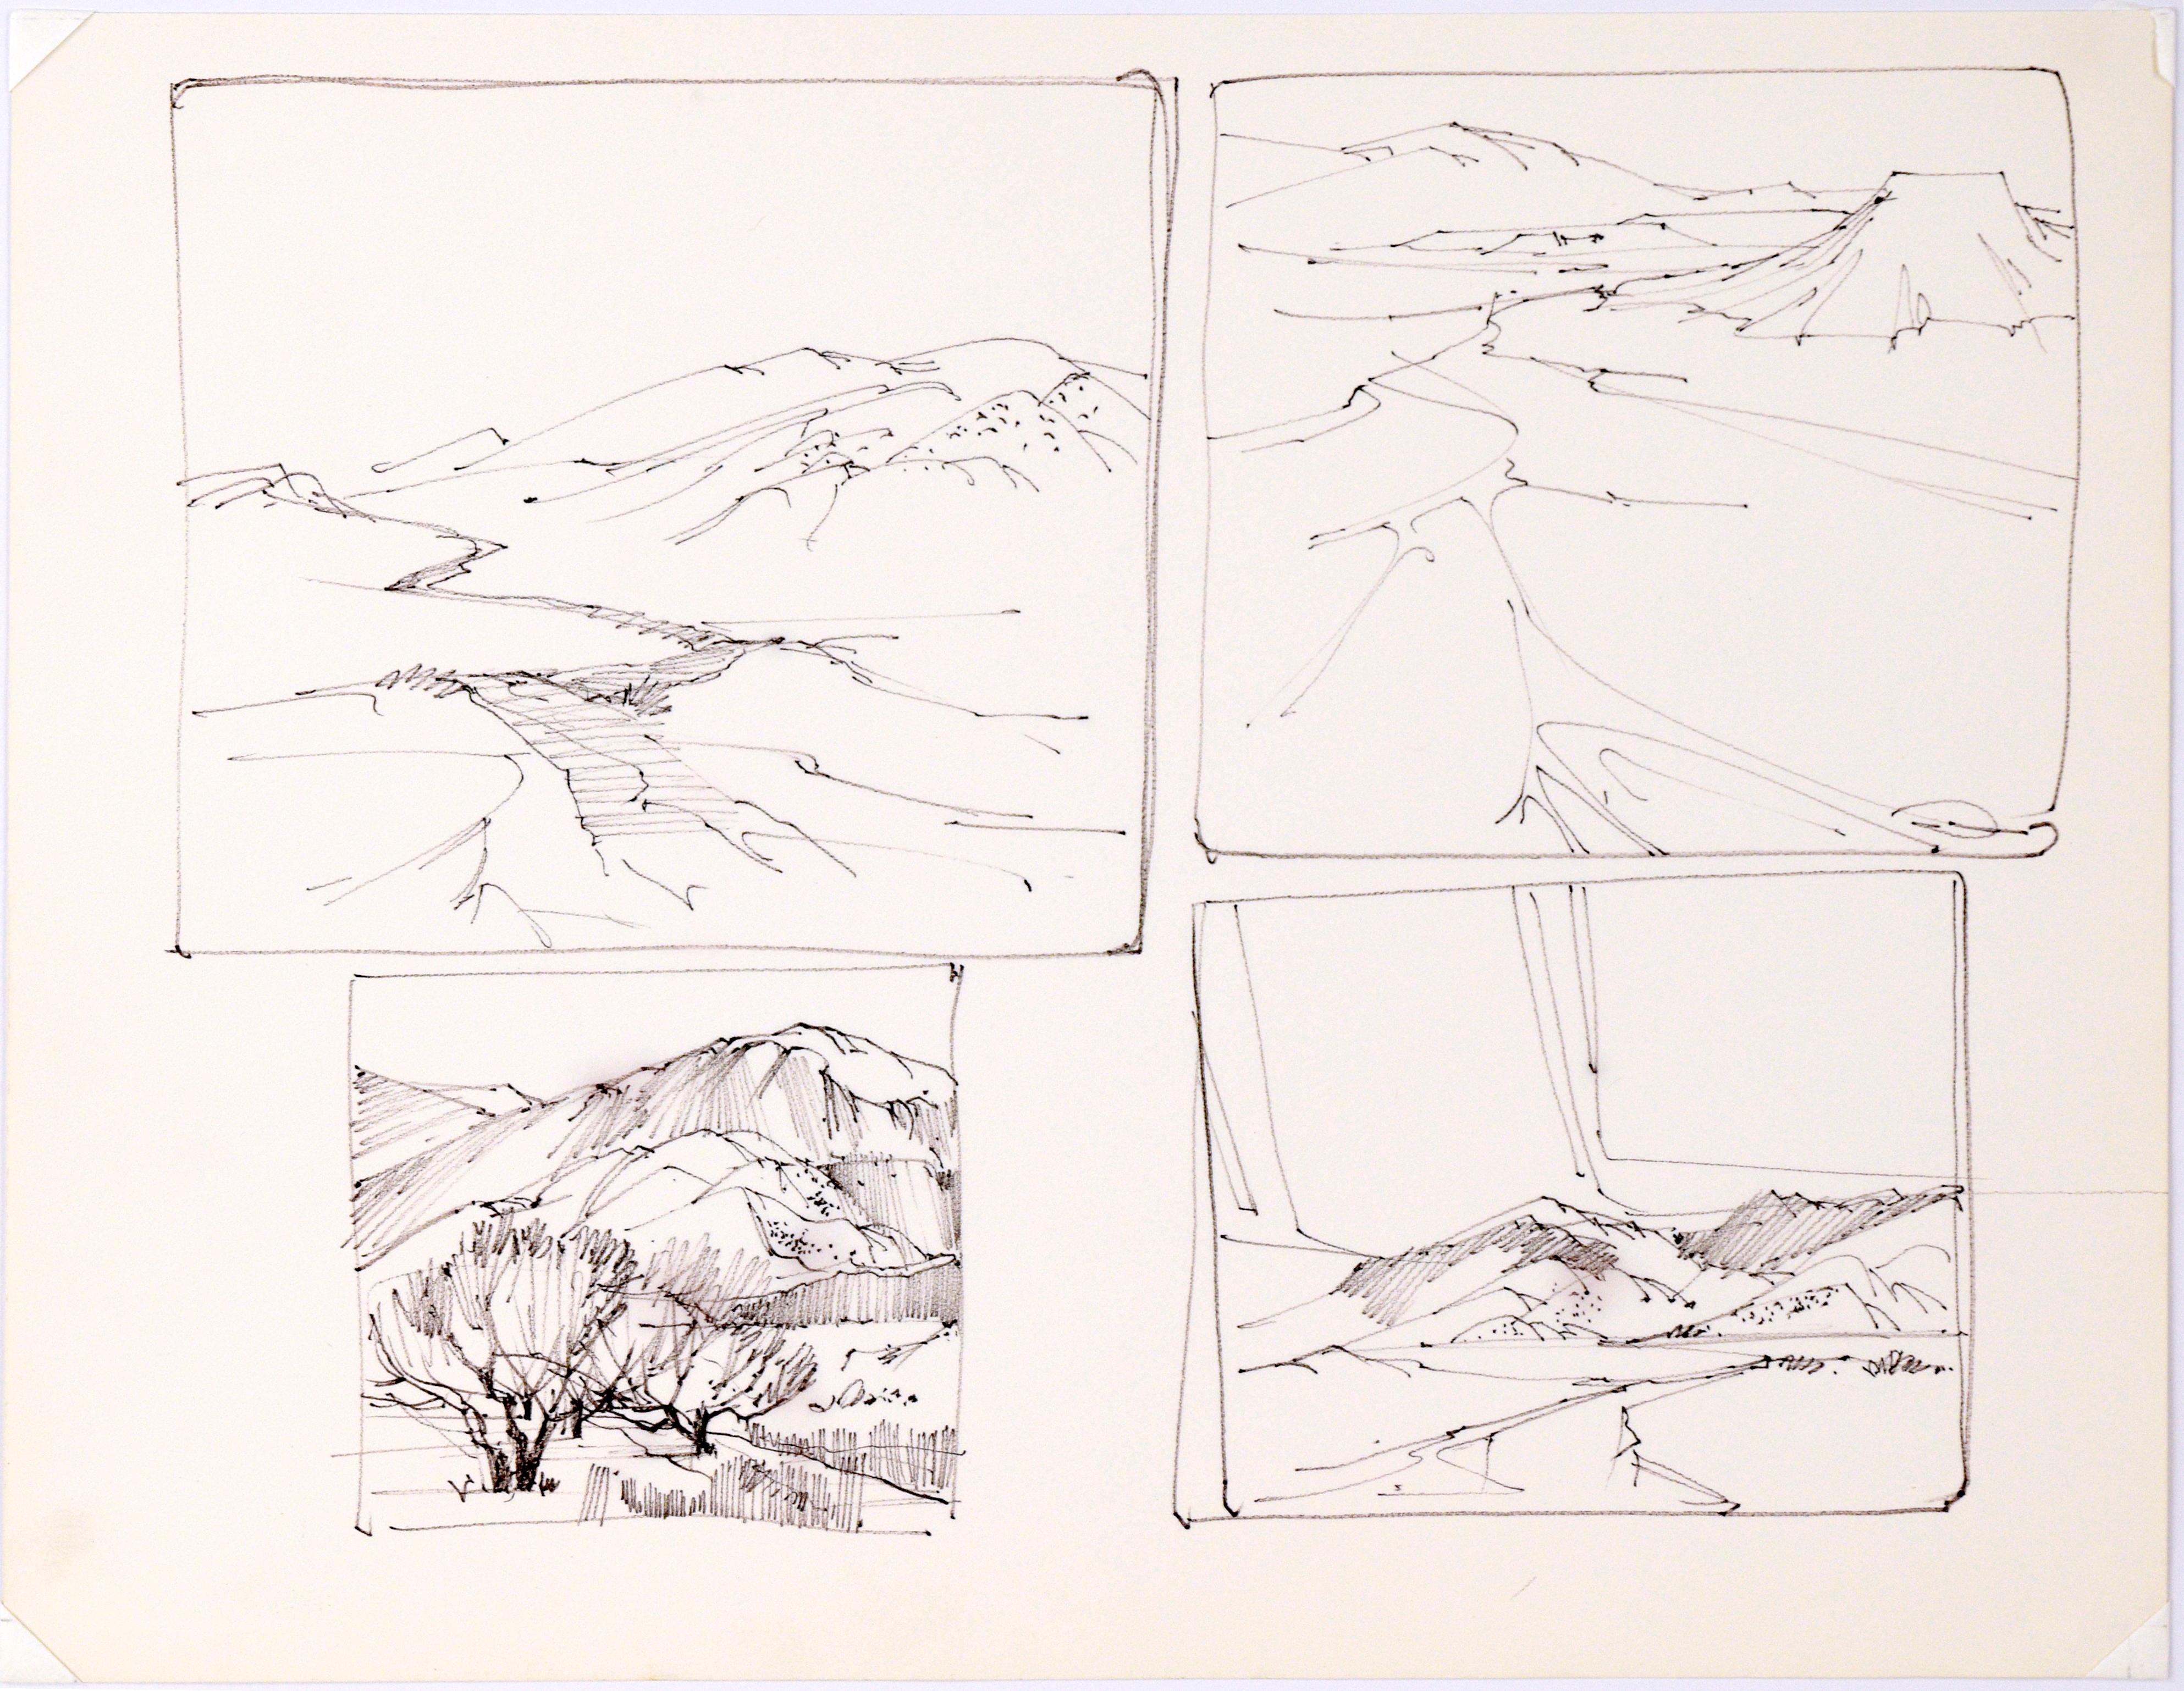 Four-Panel Thumbnail Sketches of Desert and Canyon Landscapes in Ink on Paper - Beige Landscape Art by Laurence Sisson